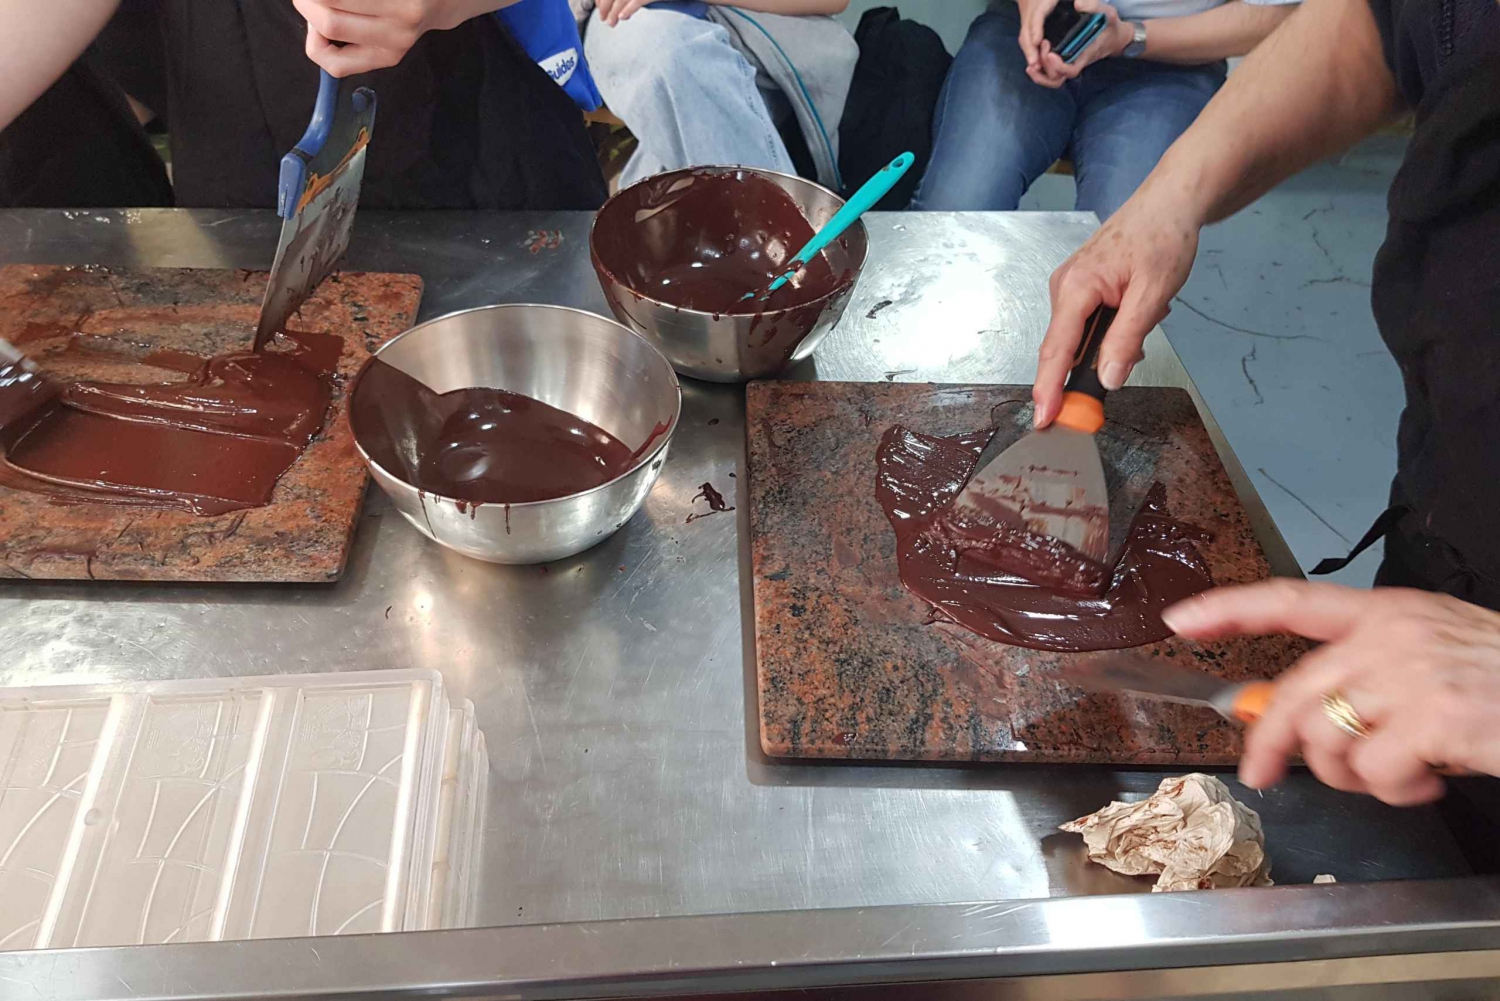 Paris: Chocolate Discovery Workshop and Tasting